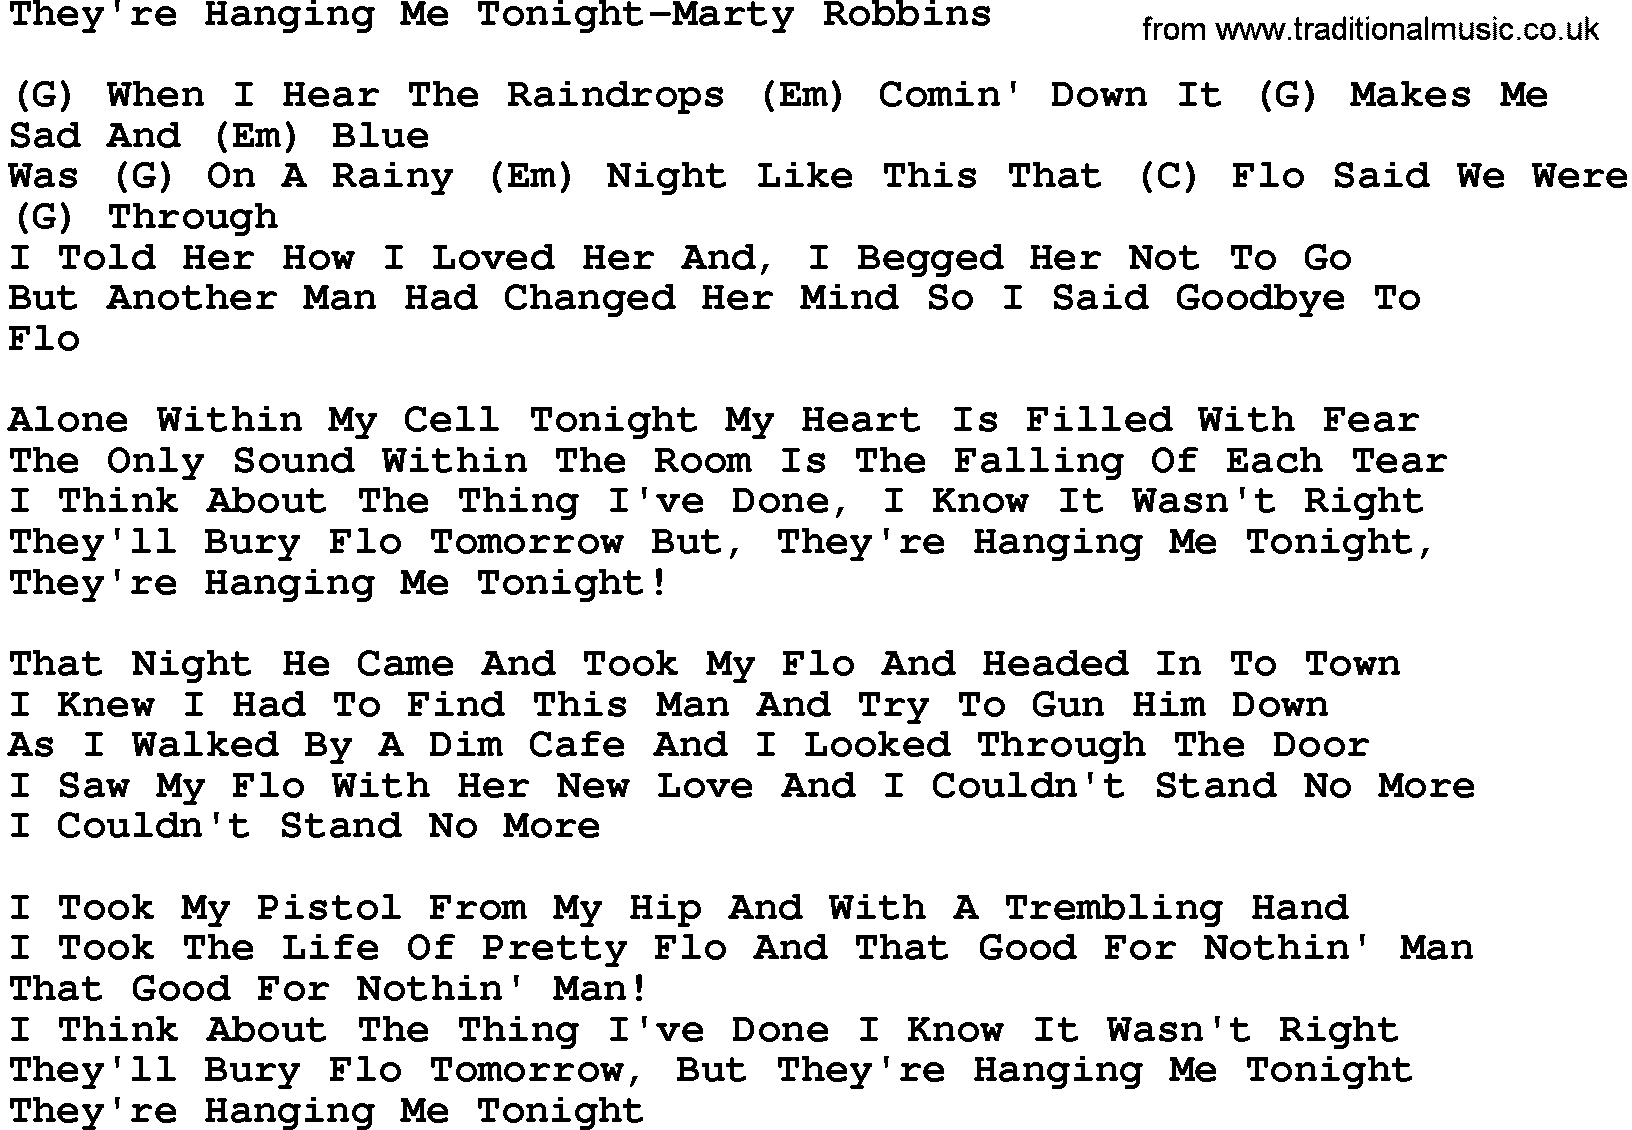 Country music song: They're Hanging Me Tonight-Marty Robbins lyrics and chords